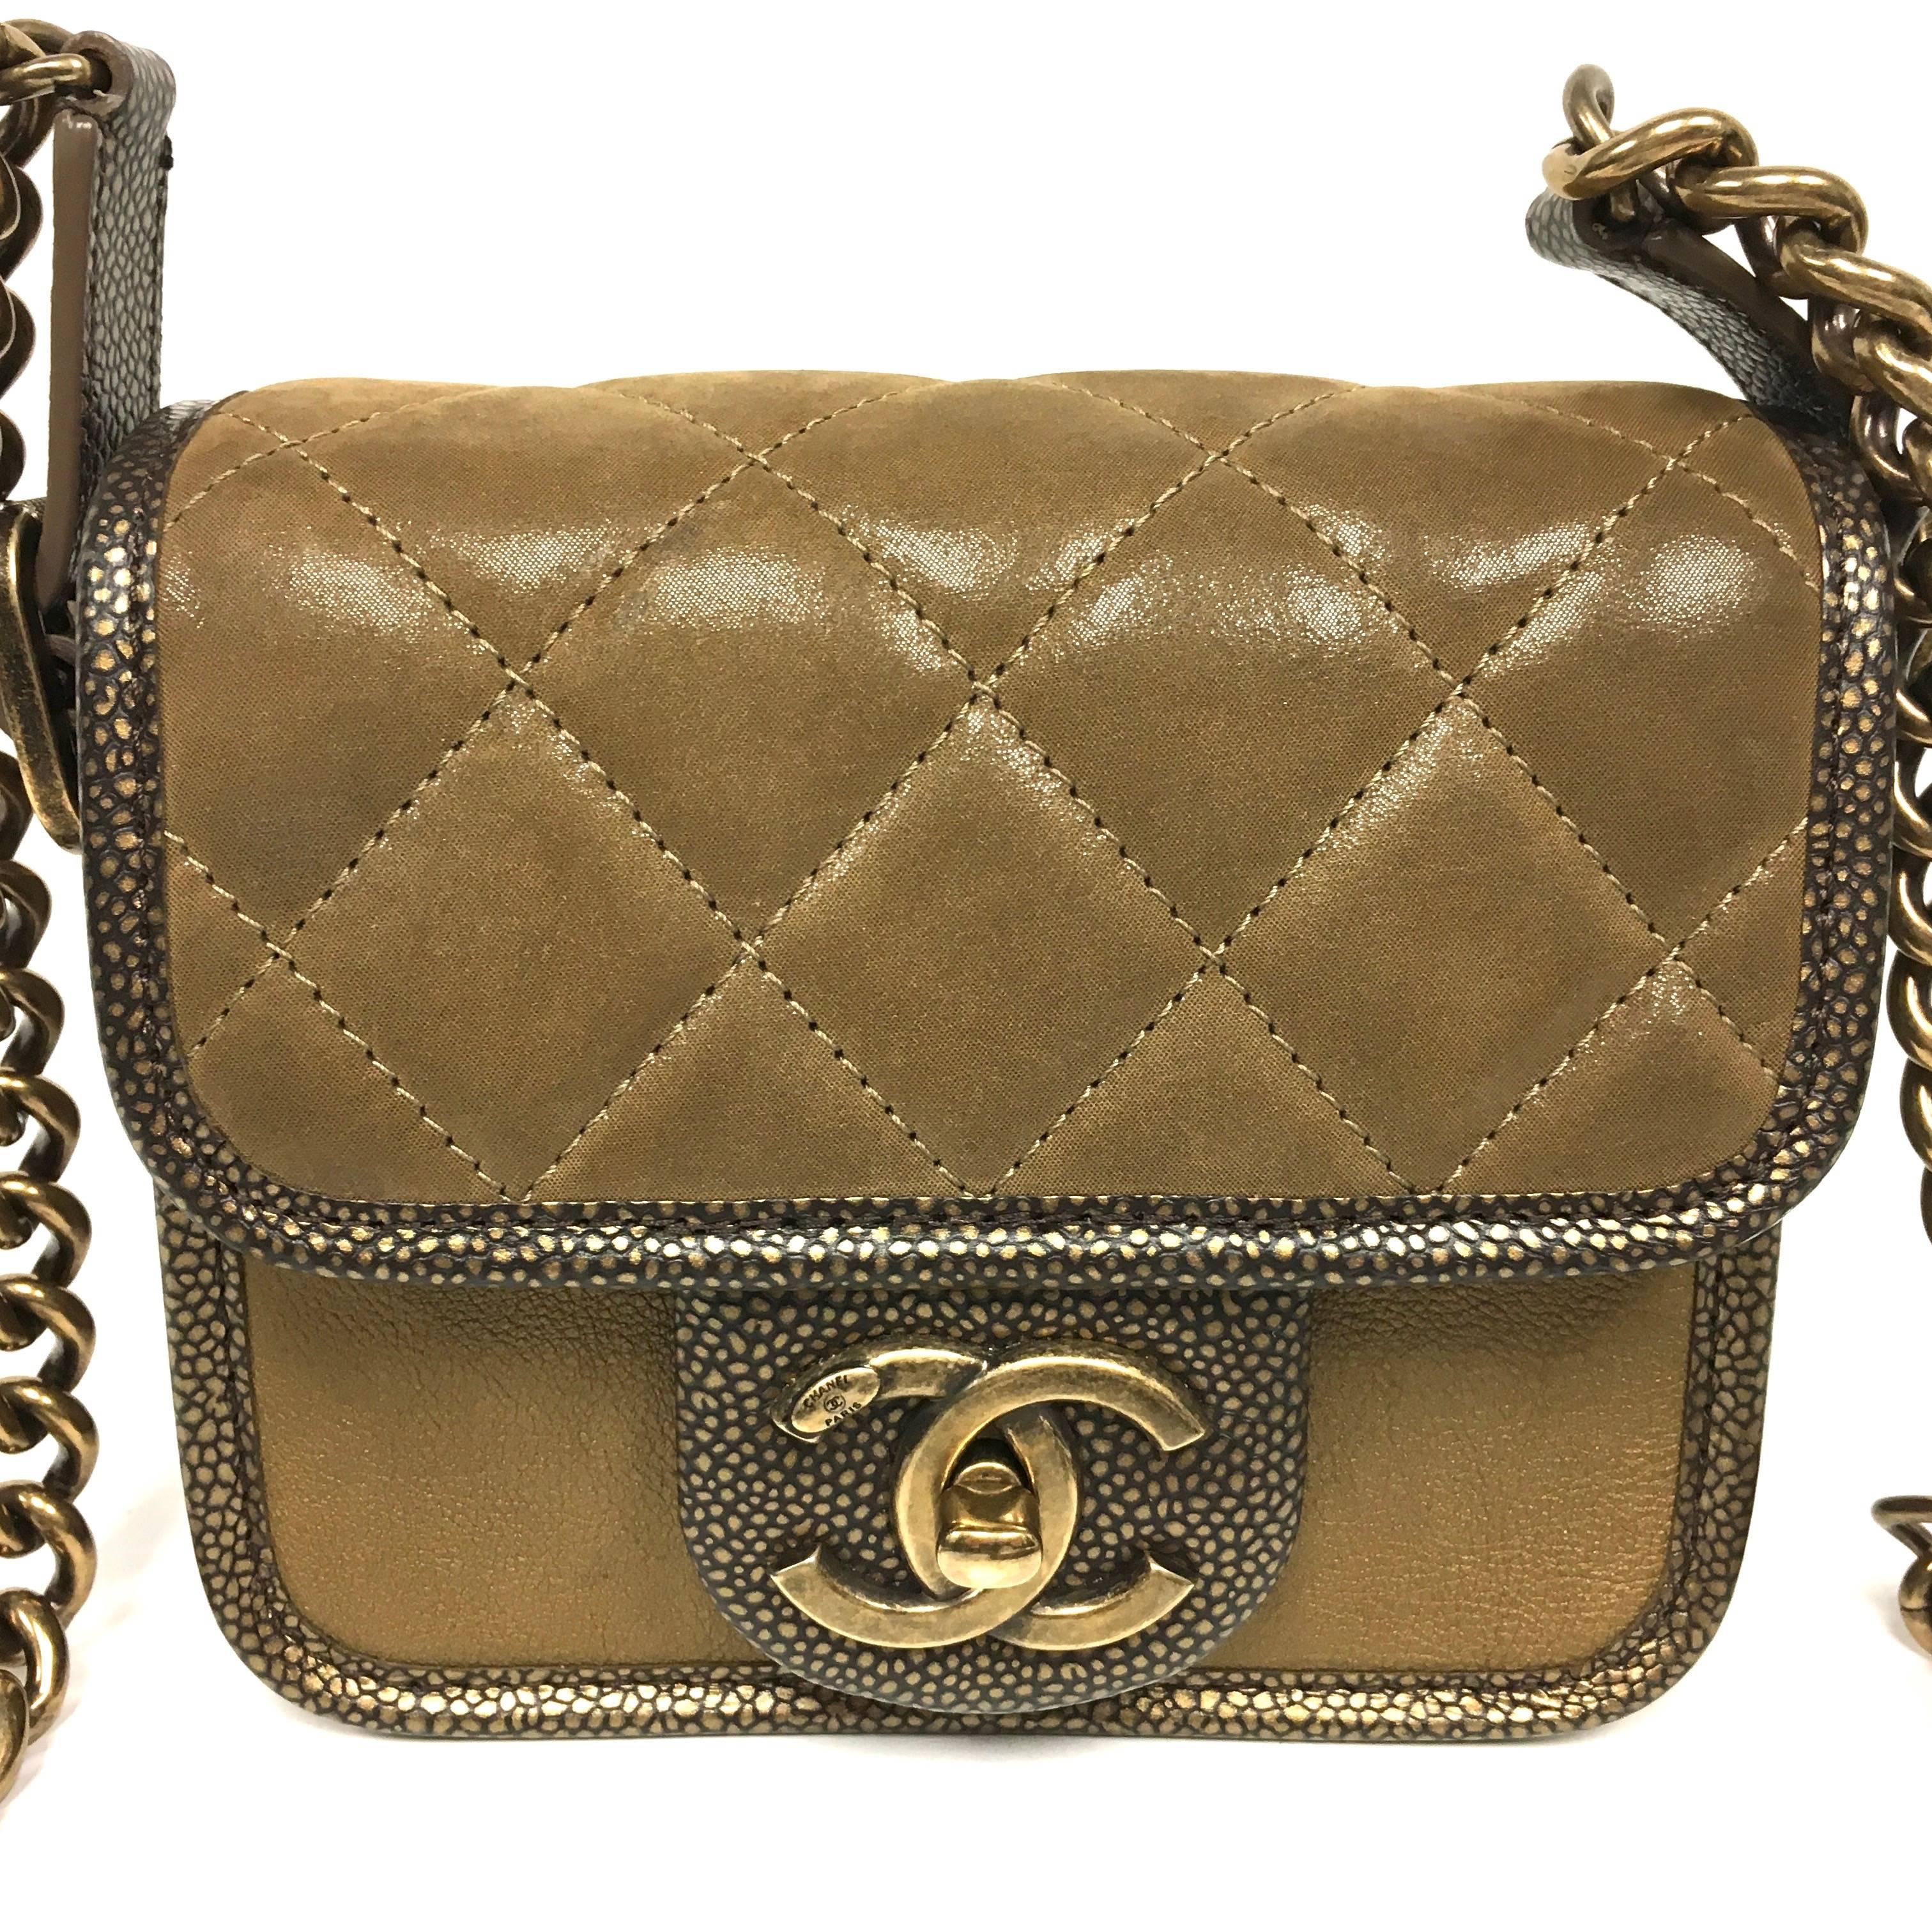 Authentic CHANEL Iridescent Calfskin Back To School Mini Crossbody Flap in Brown and Bronze from the 2012 Fall collection.. "A cross between a boy and a classic mini square flap." Crafted of textured diamond quilted calfskin leather with